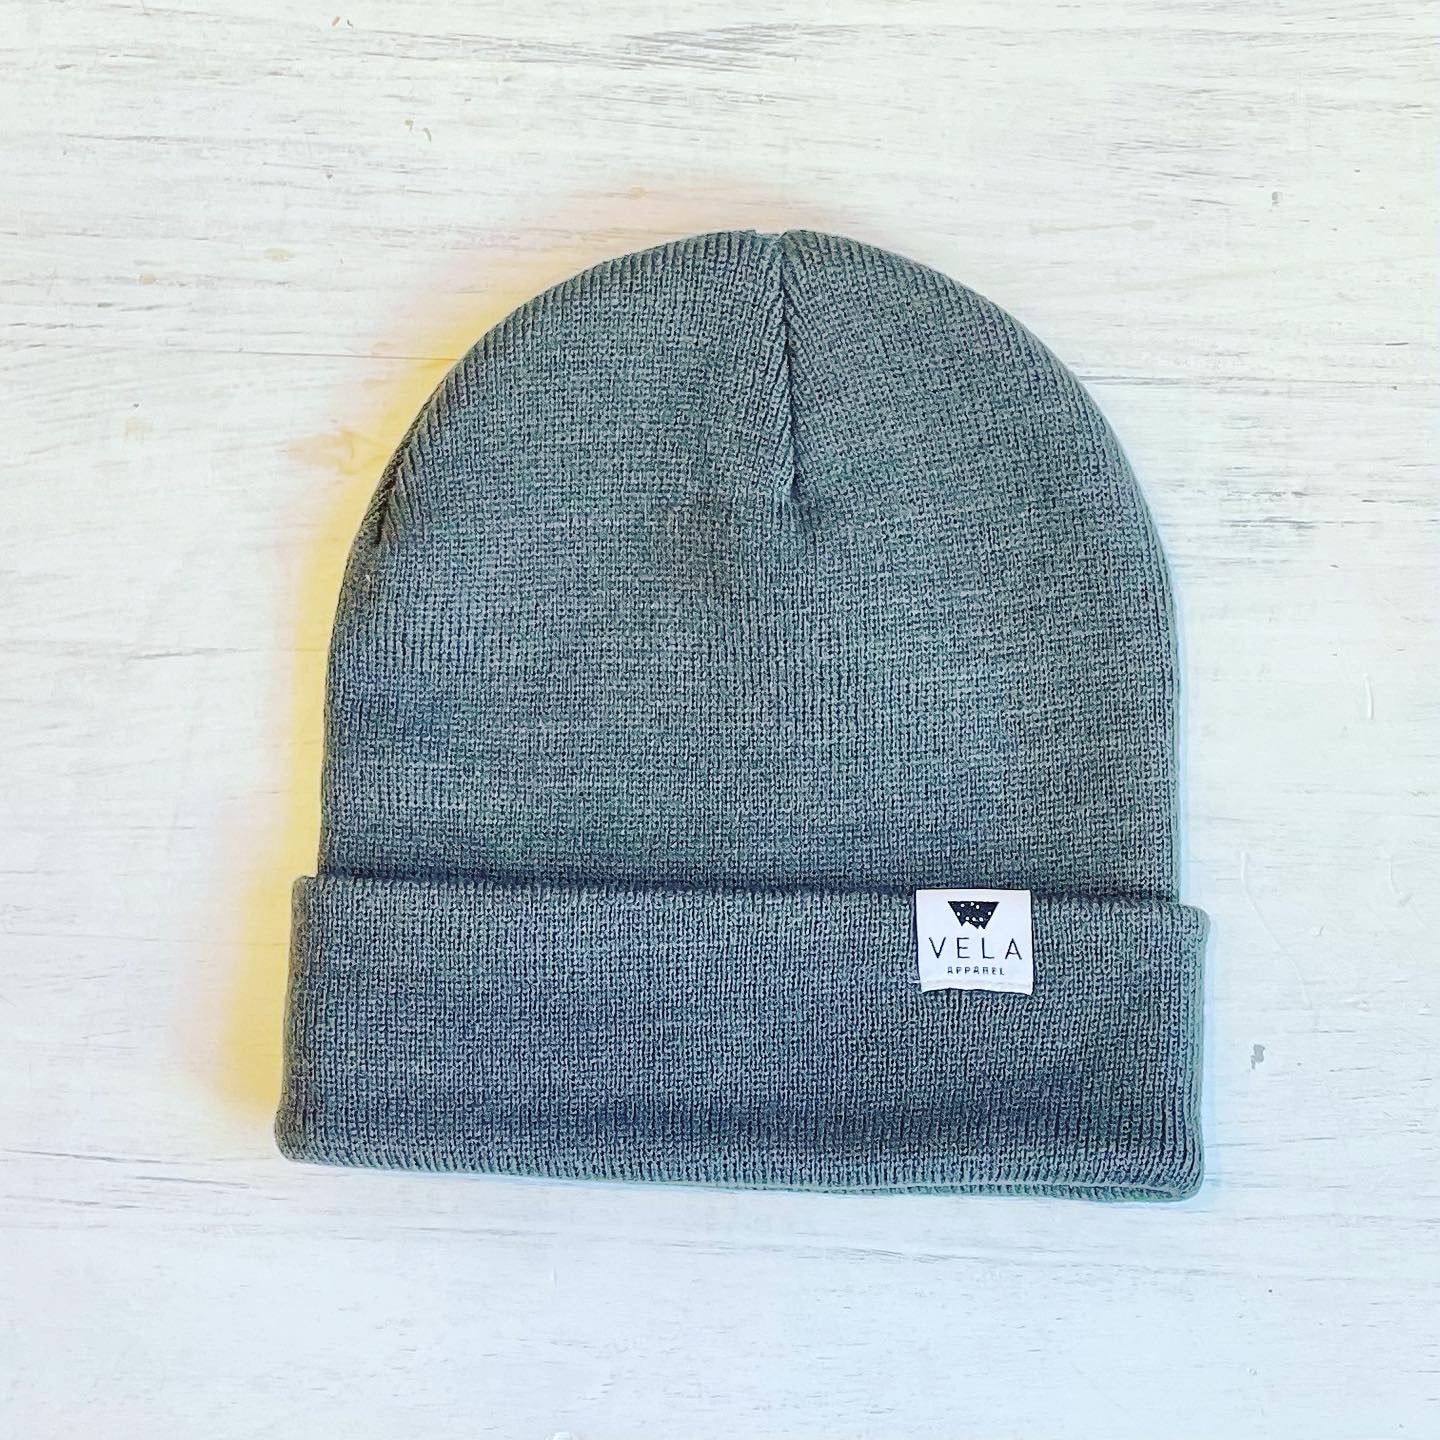 The Big Chill Beanie